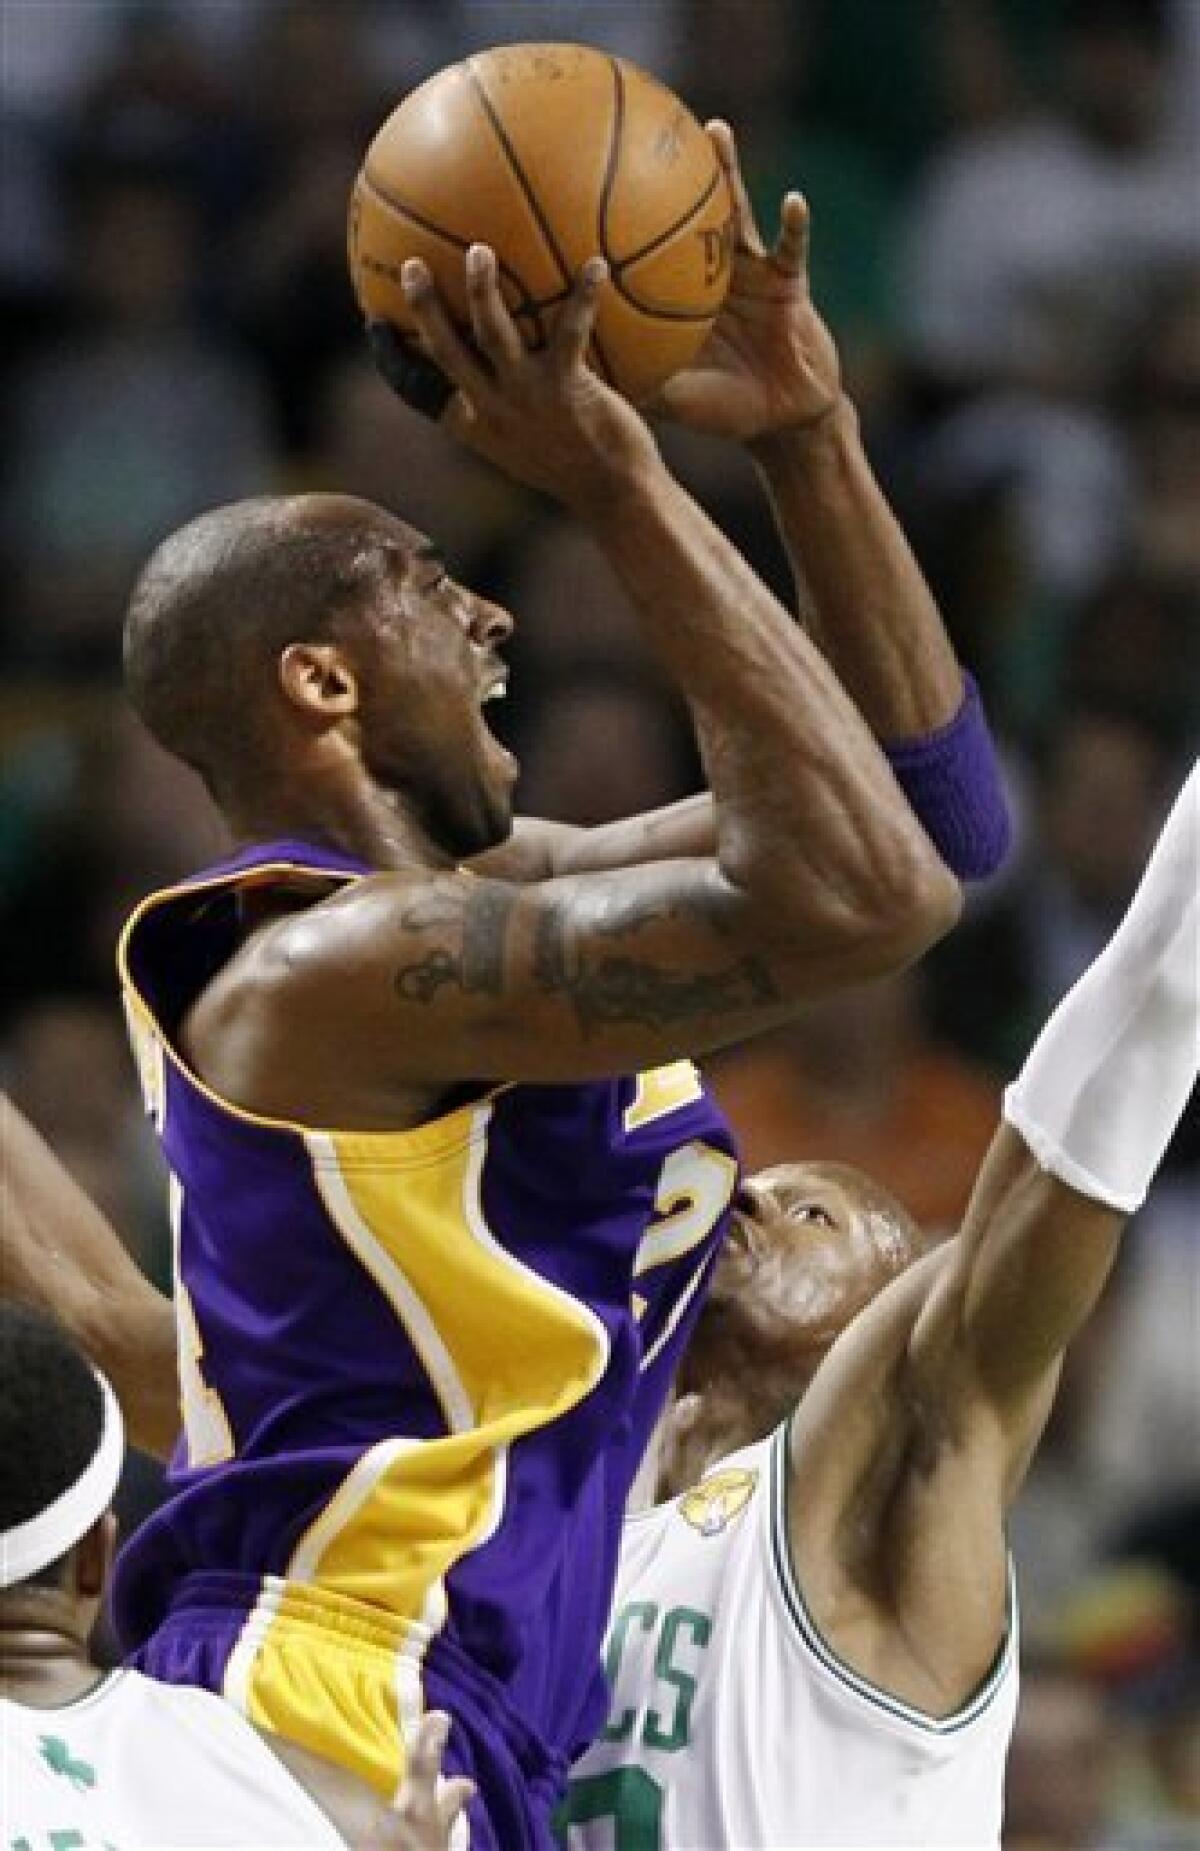 Kobe Bryant would have been 42 Sunday. What he's missed this season.